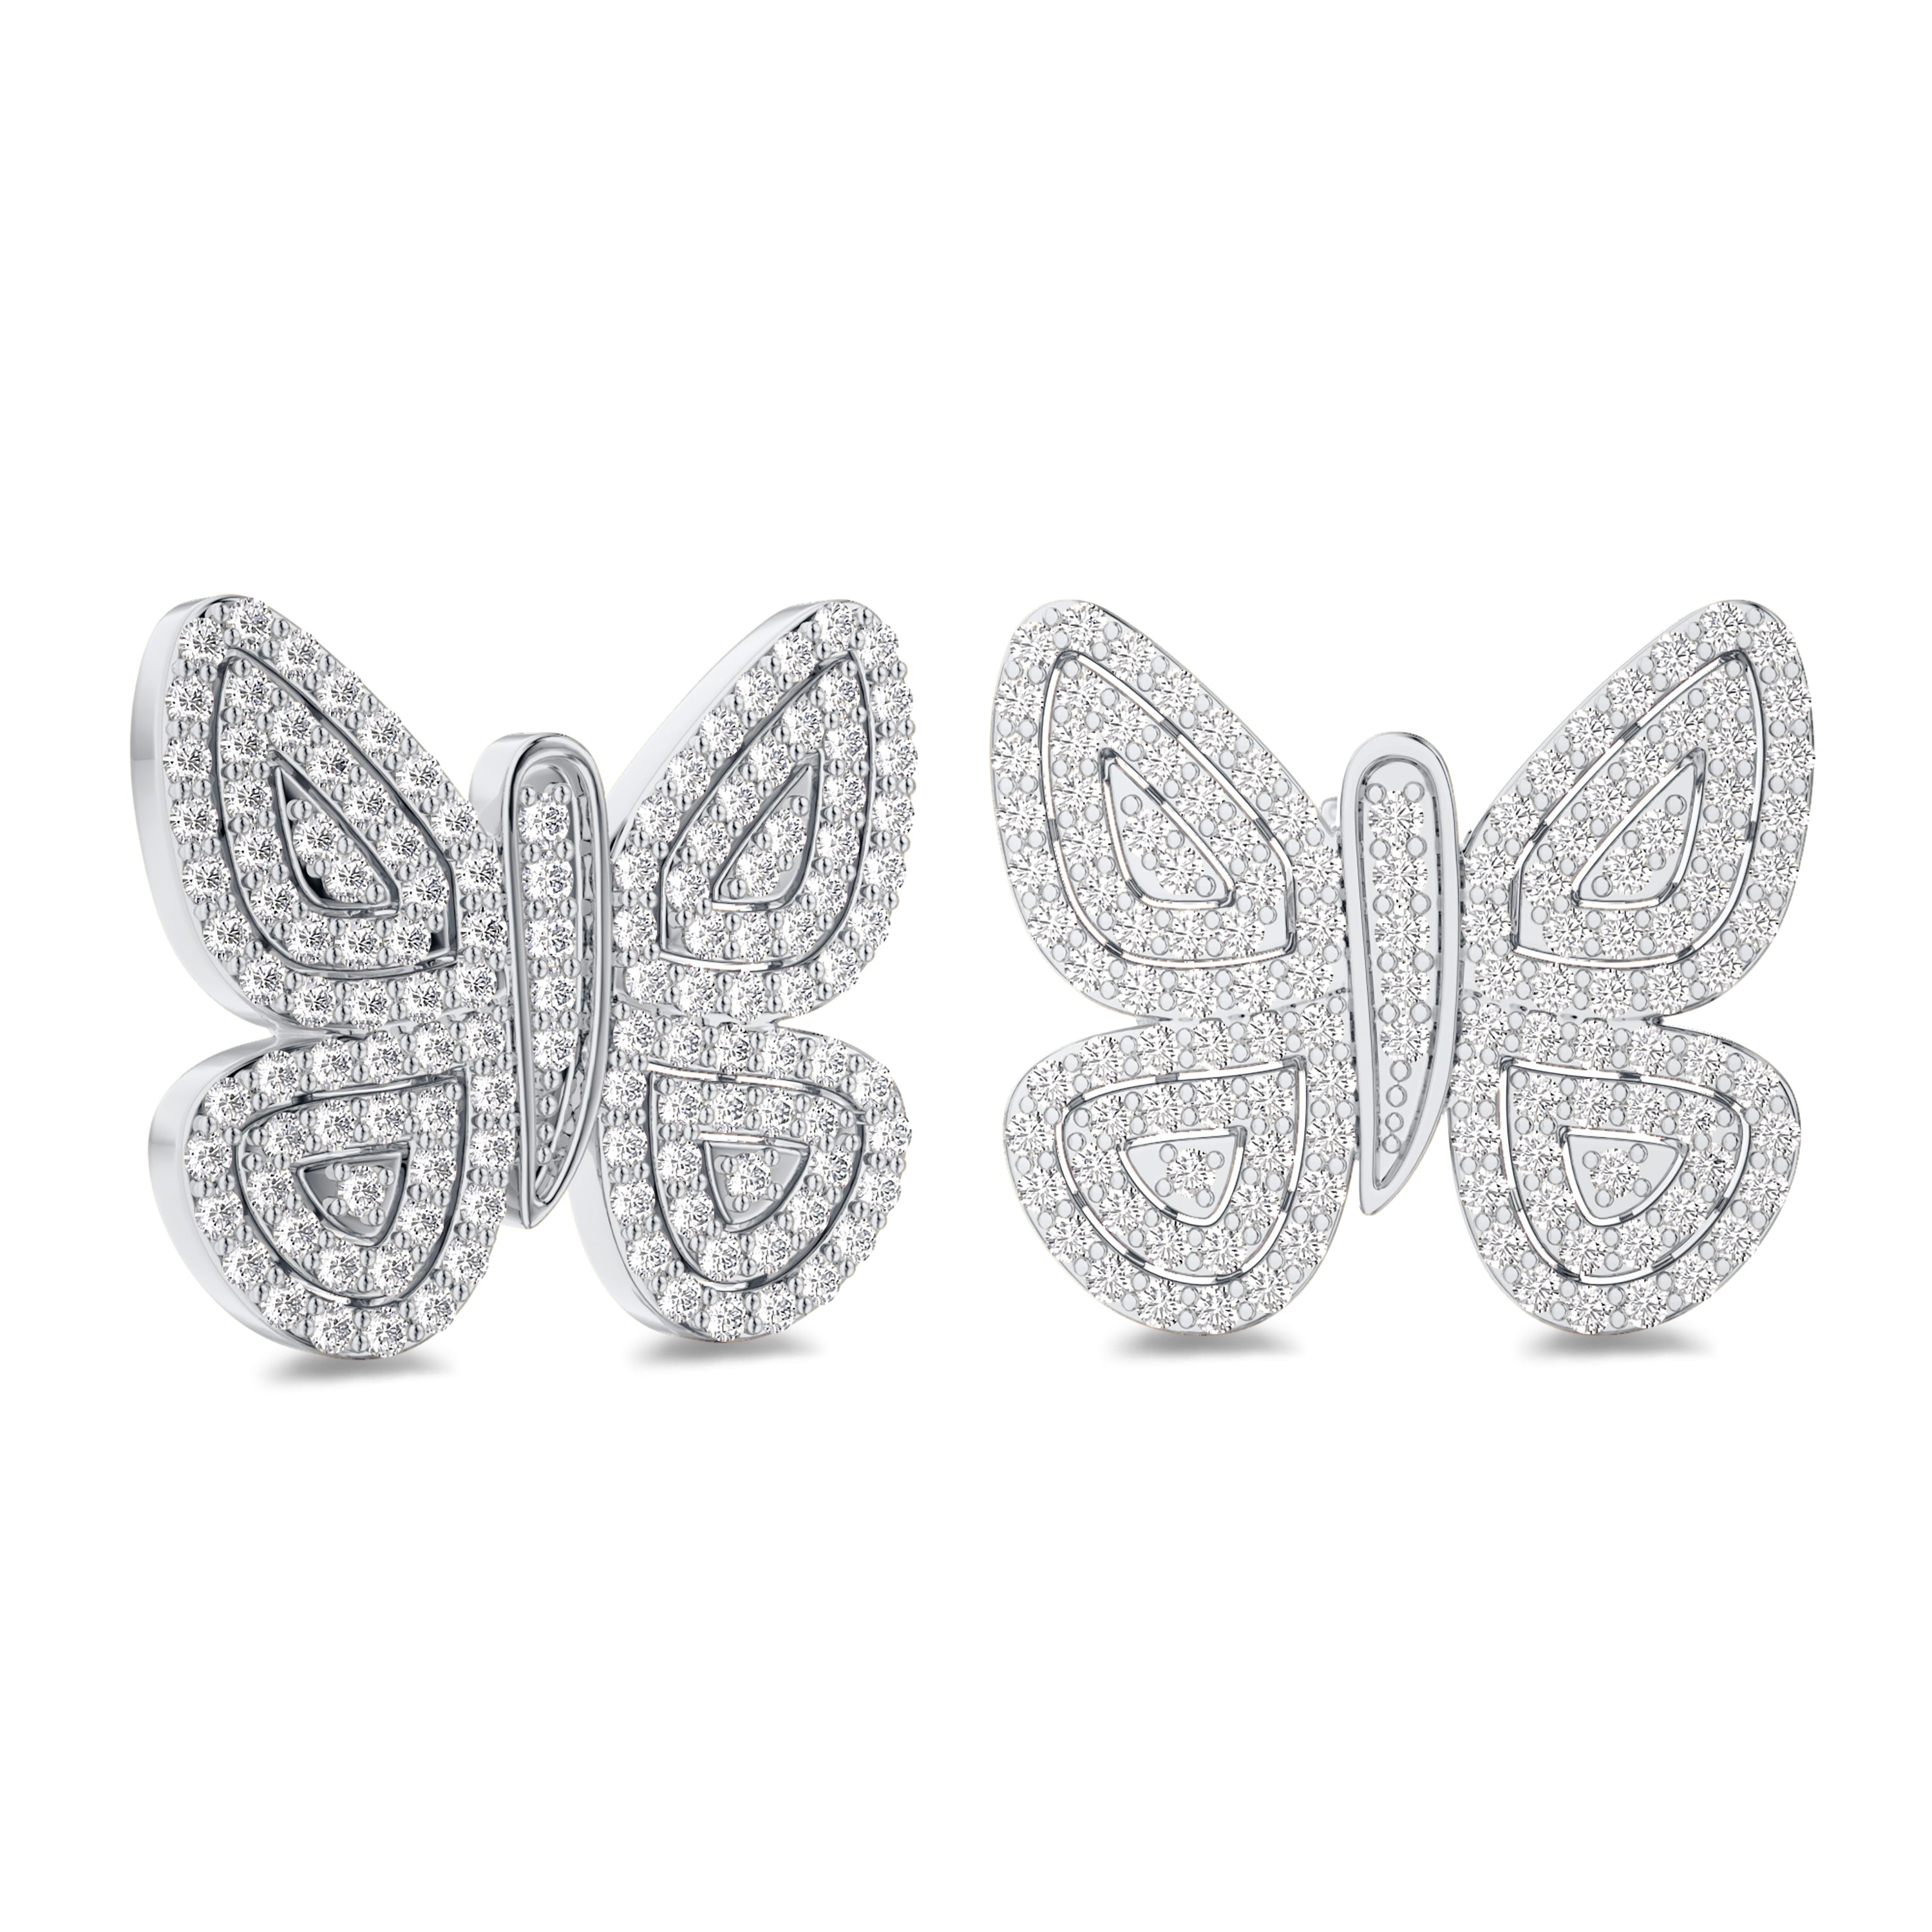 Butterfly diamond earrings in 18k white gold, FG color, VS-SI clarity, 0.27 carats